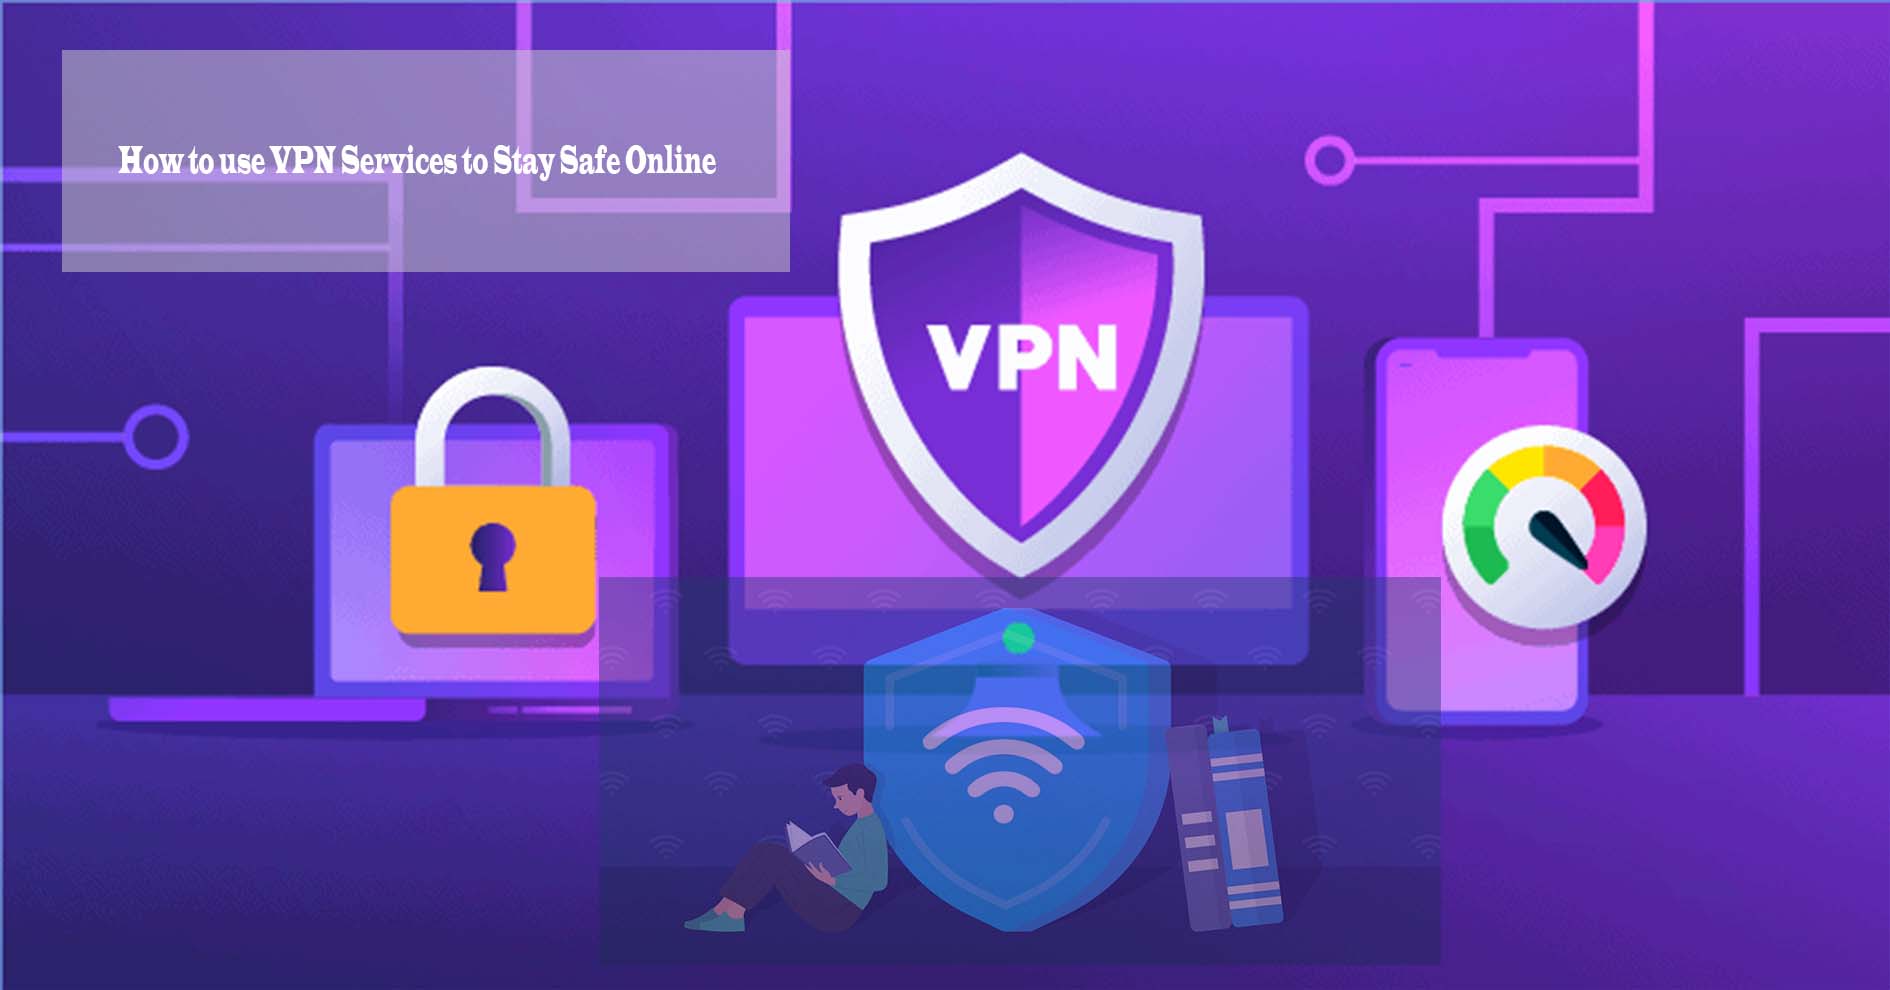 How to use VPN Services to Stay Safe Online